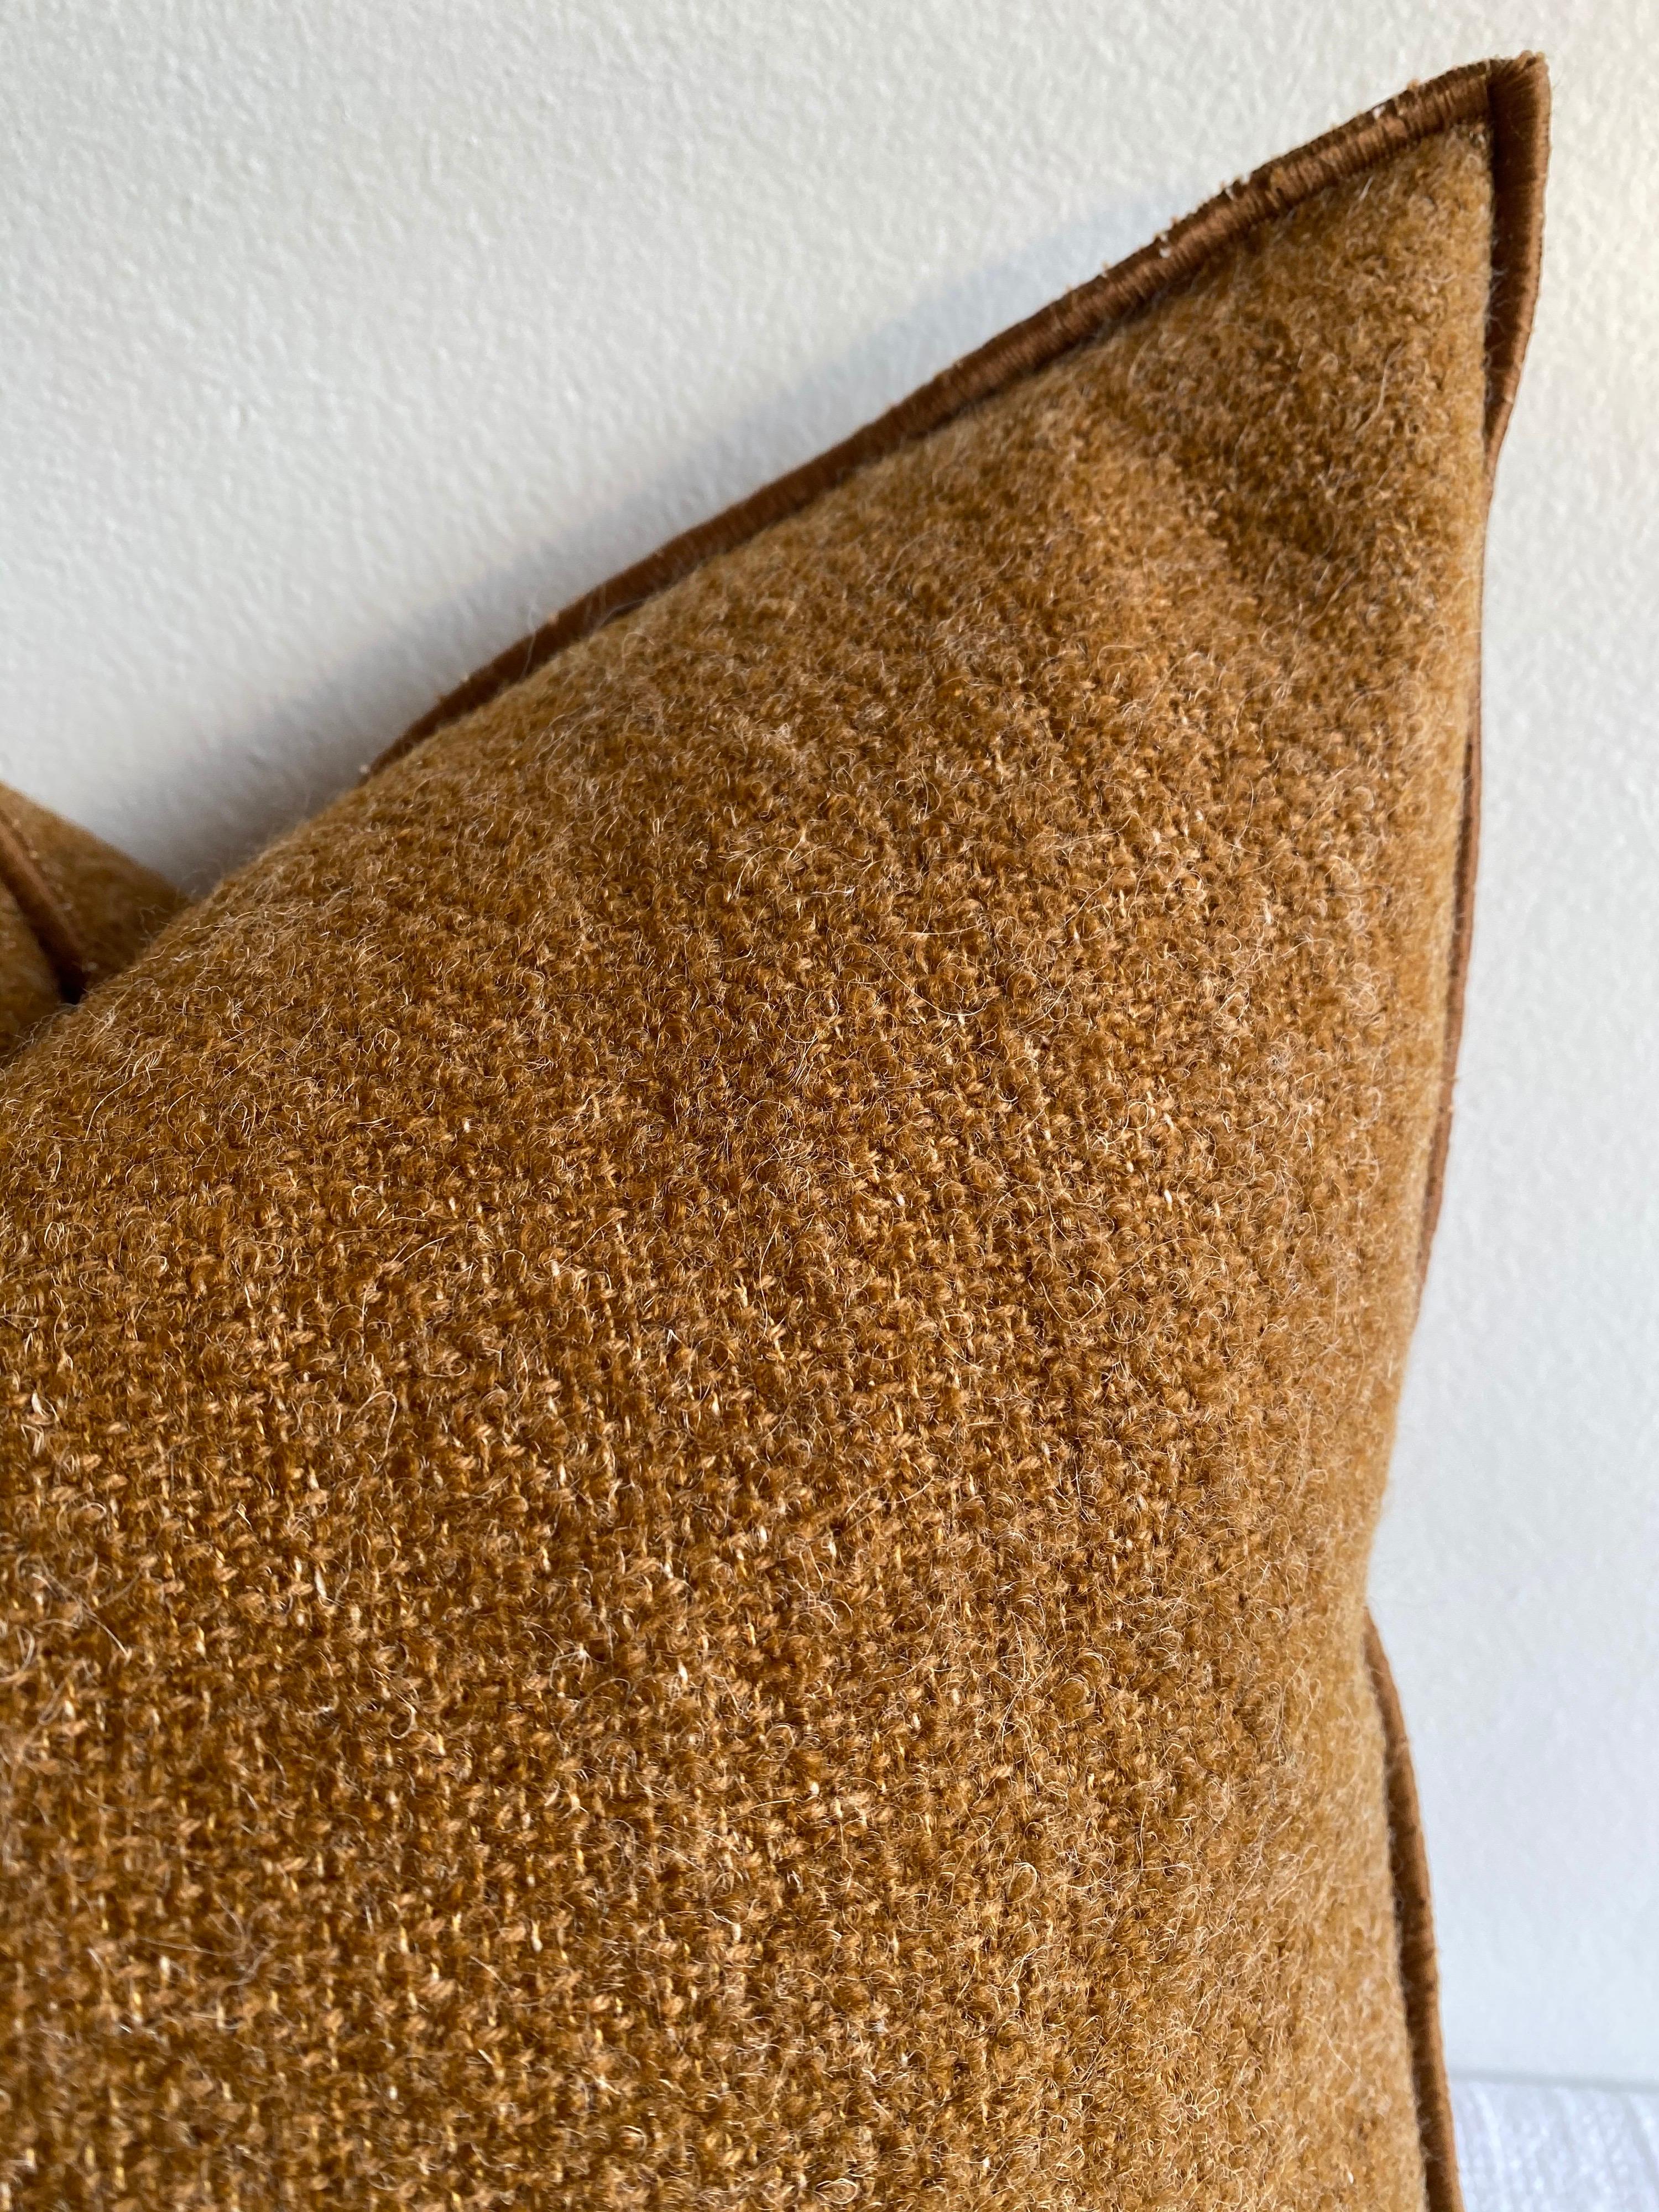 Custom wool blend accent pillow with down insert
Color: Terracotta
A deep rust colored nubby boucle style pillow with a stitched edge, metal zipper closure.
Size 20